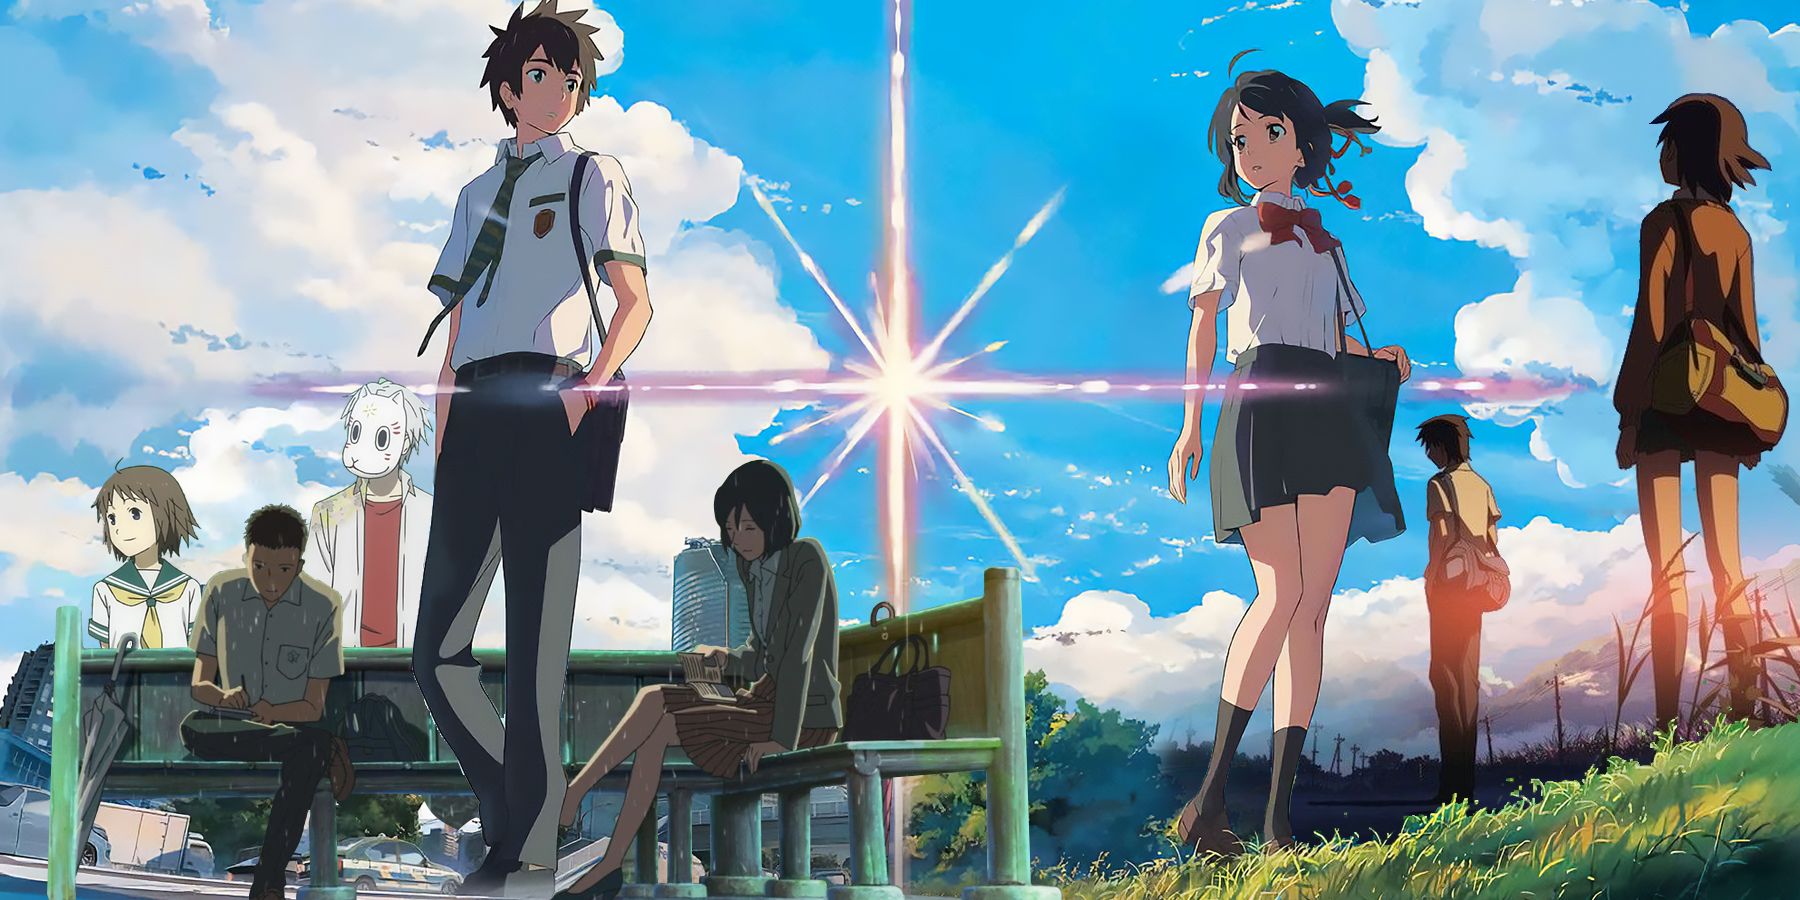 Best anime movies of all time to add to your watch list